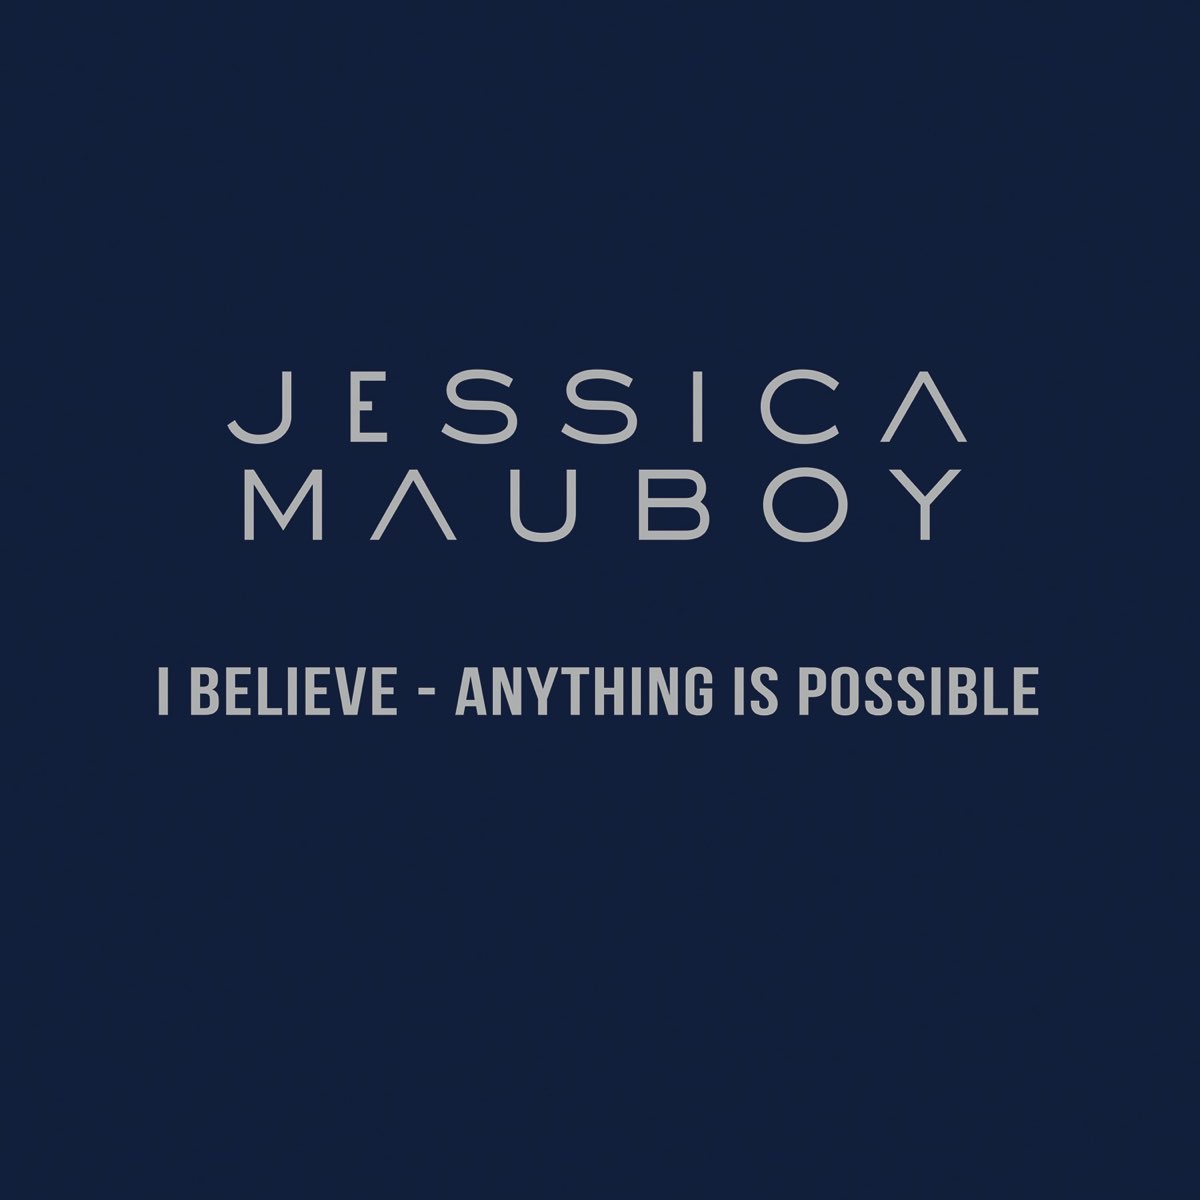 Anything is possible. Believe anything. Anything is possible Купка. Believer anything.